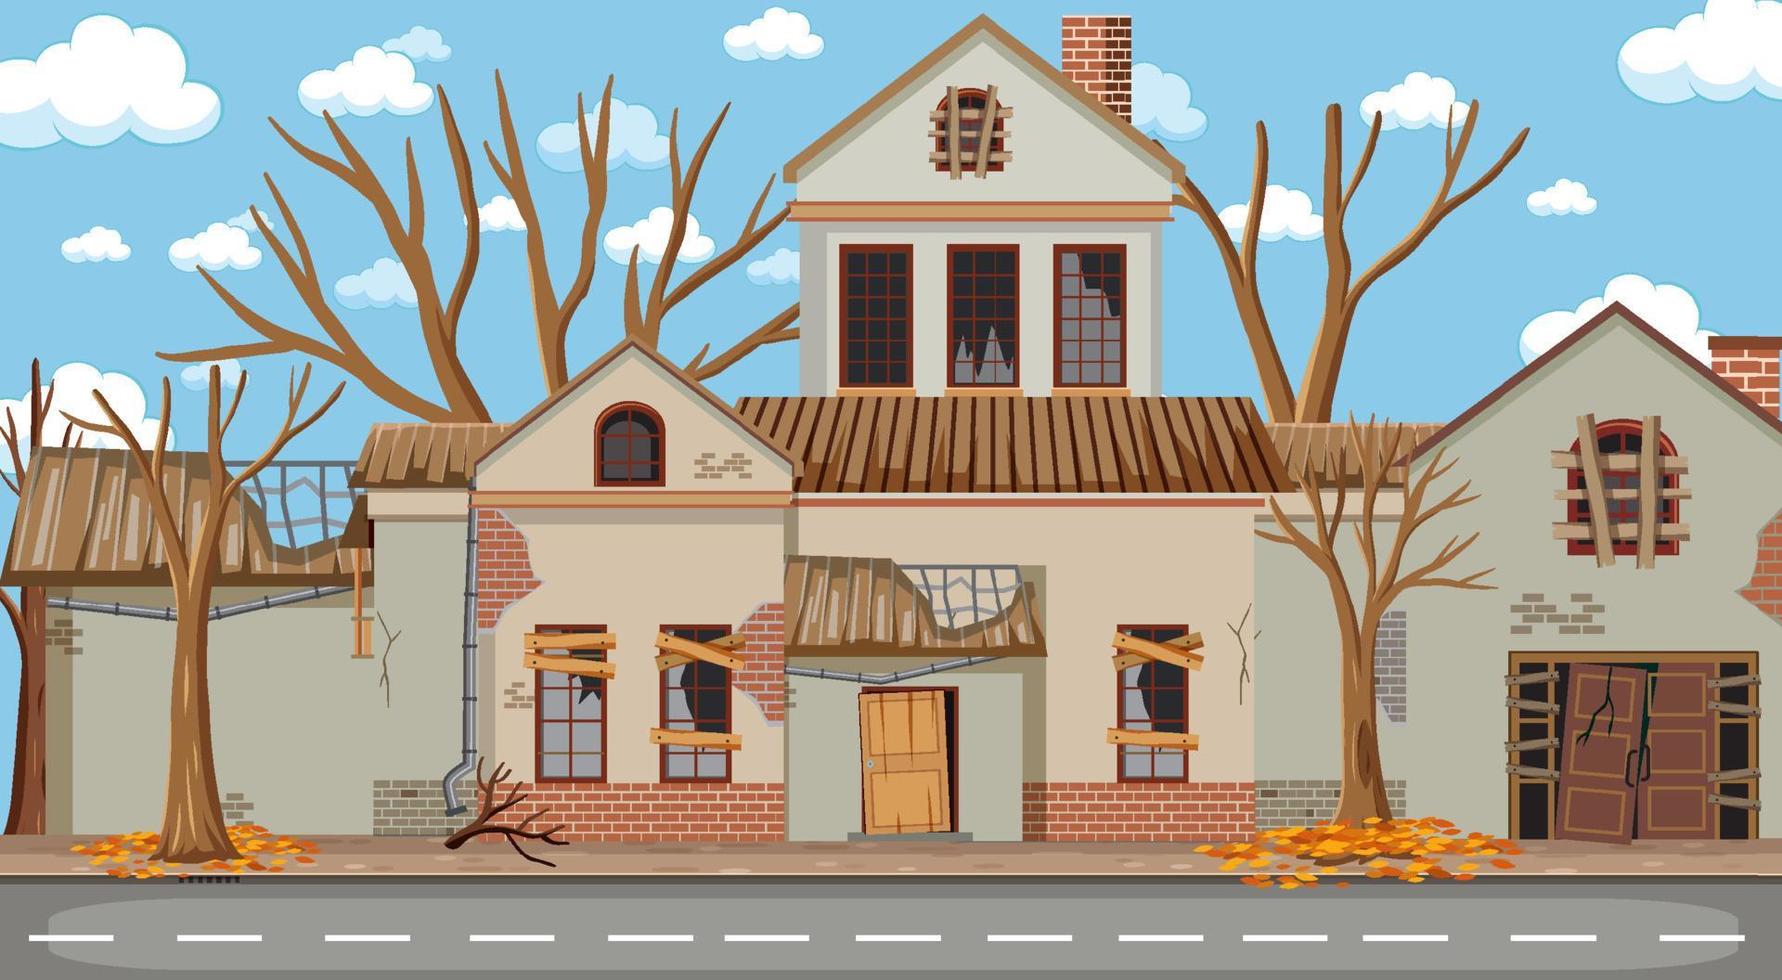 Abandon empty rural town with old broken house background vector